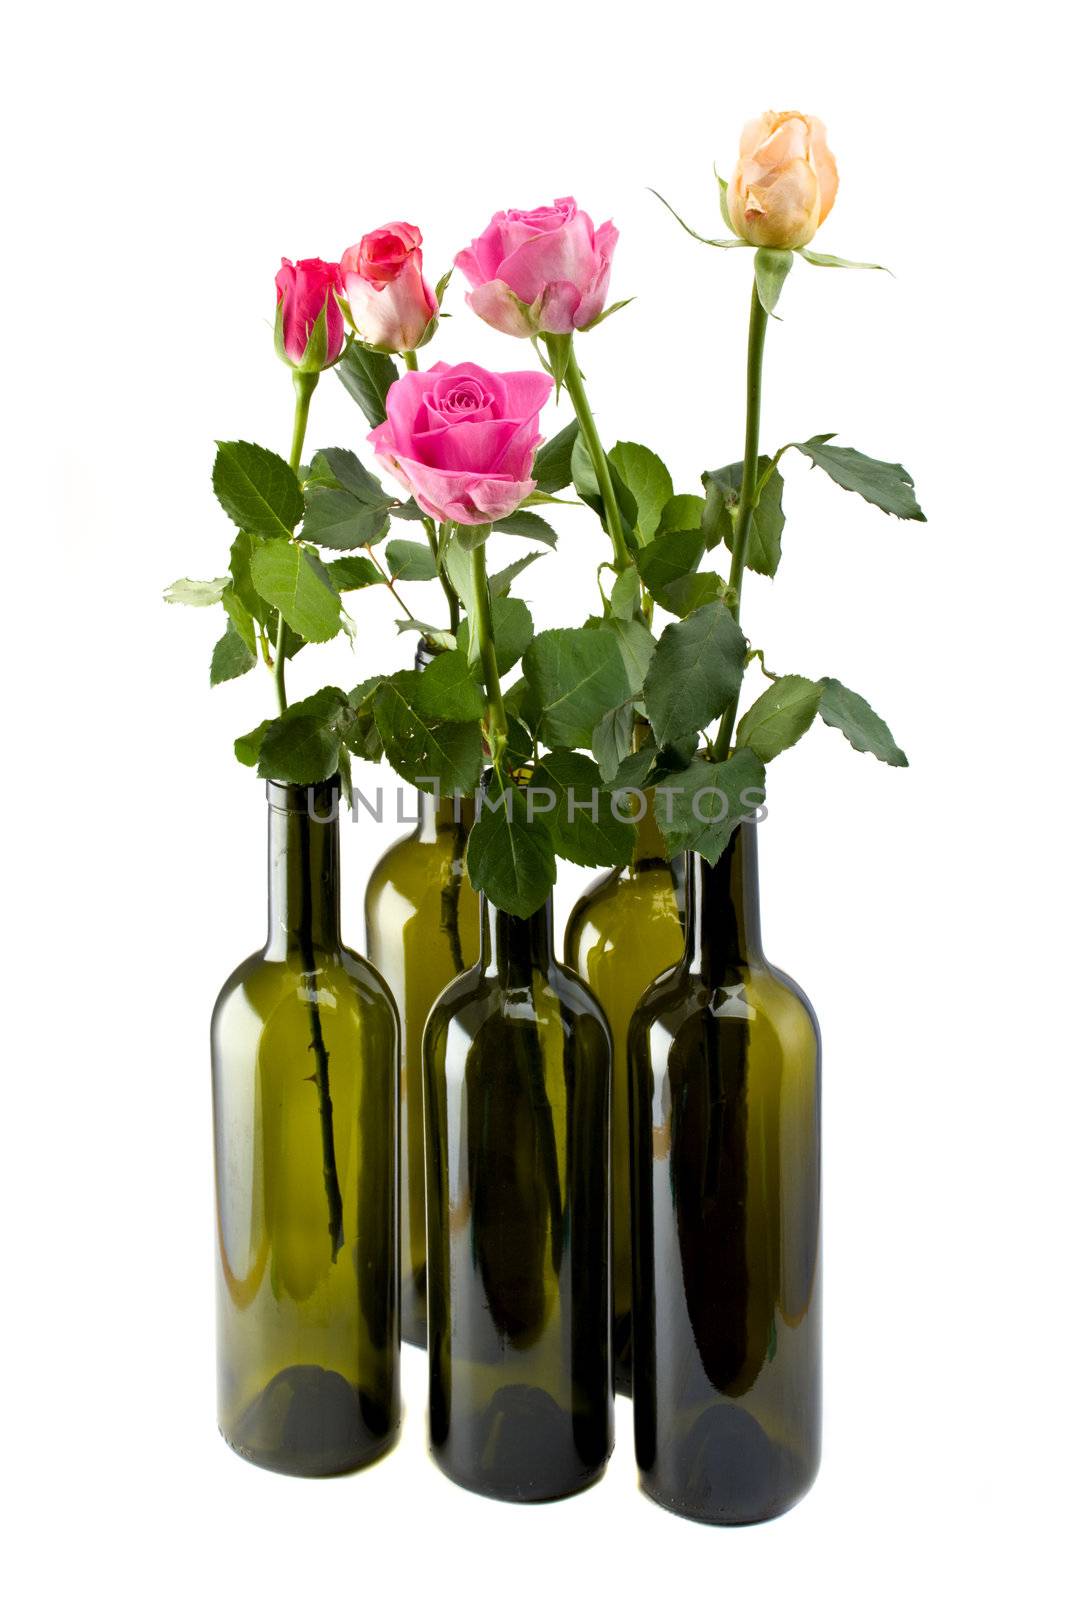 colorful roses in six empty wine bottles isolated on white background